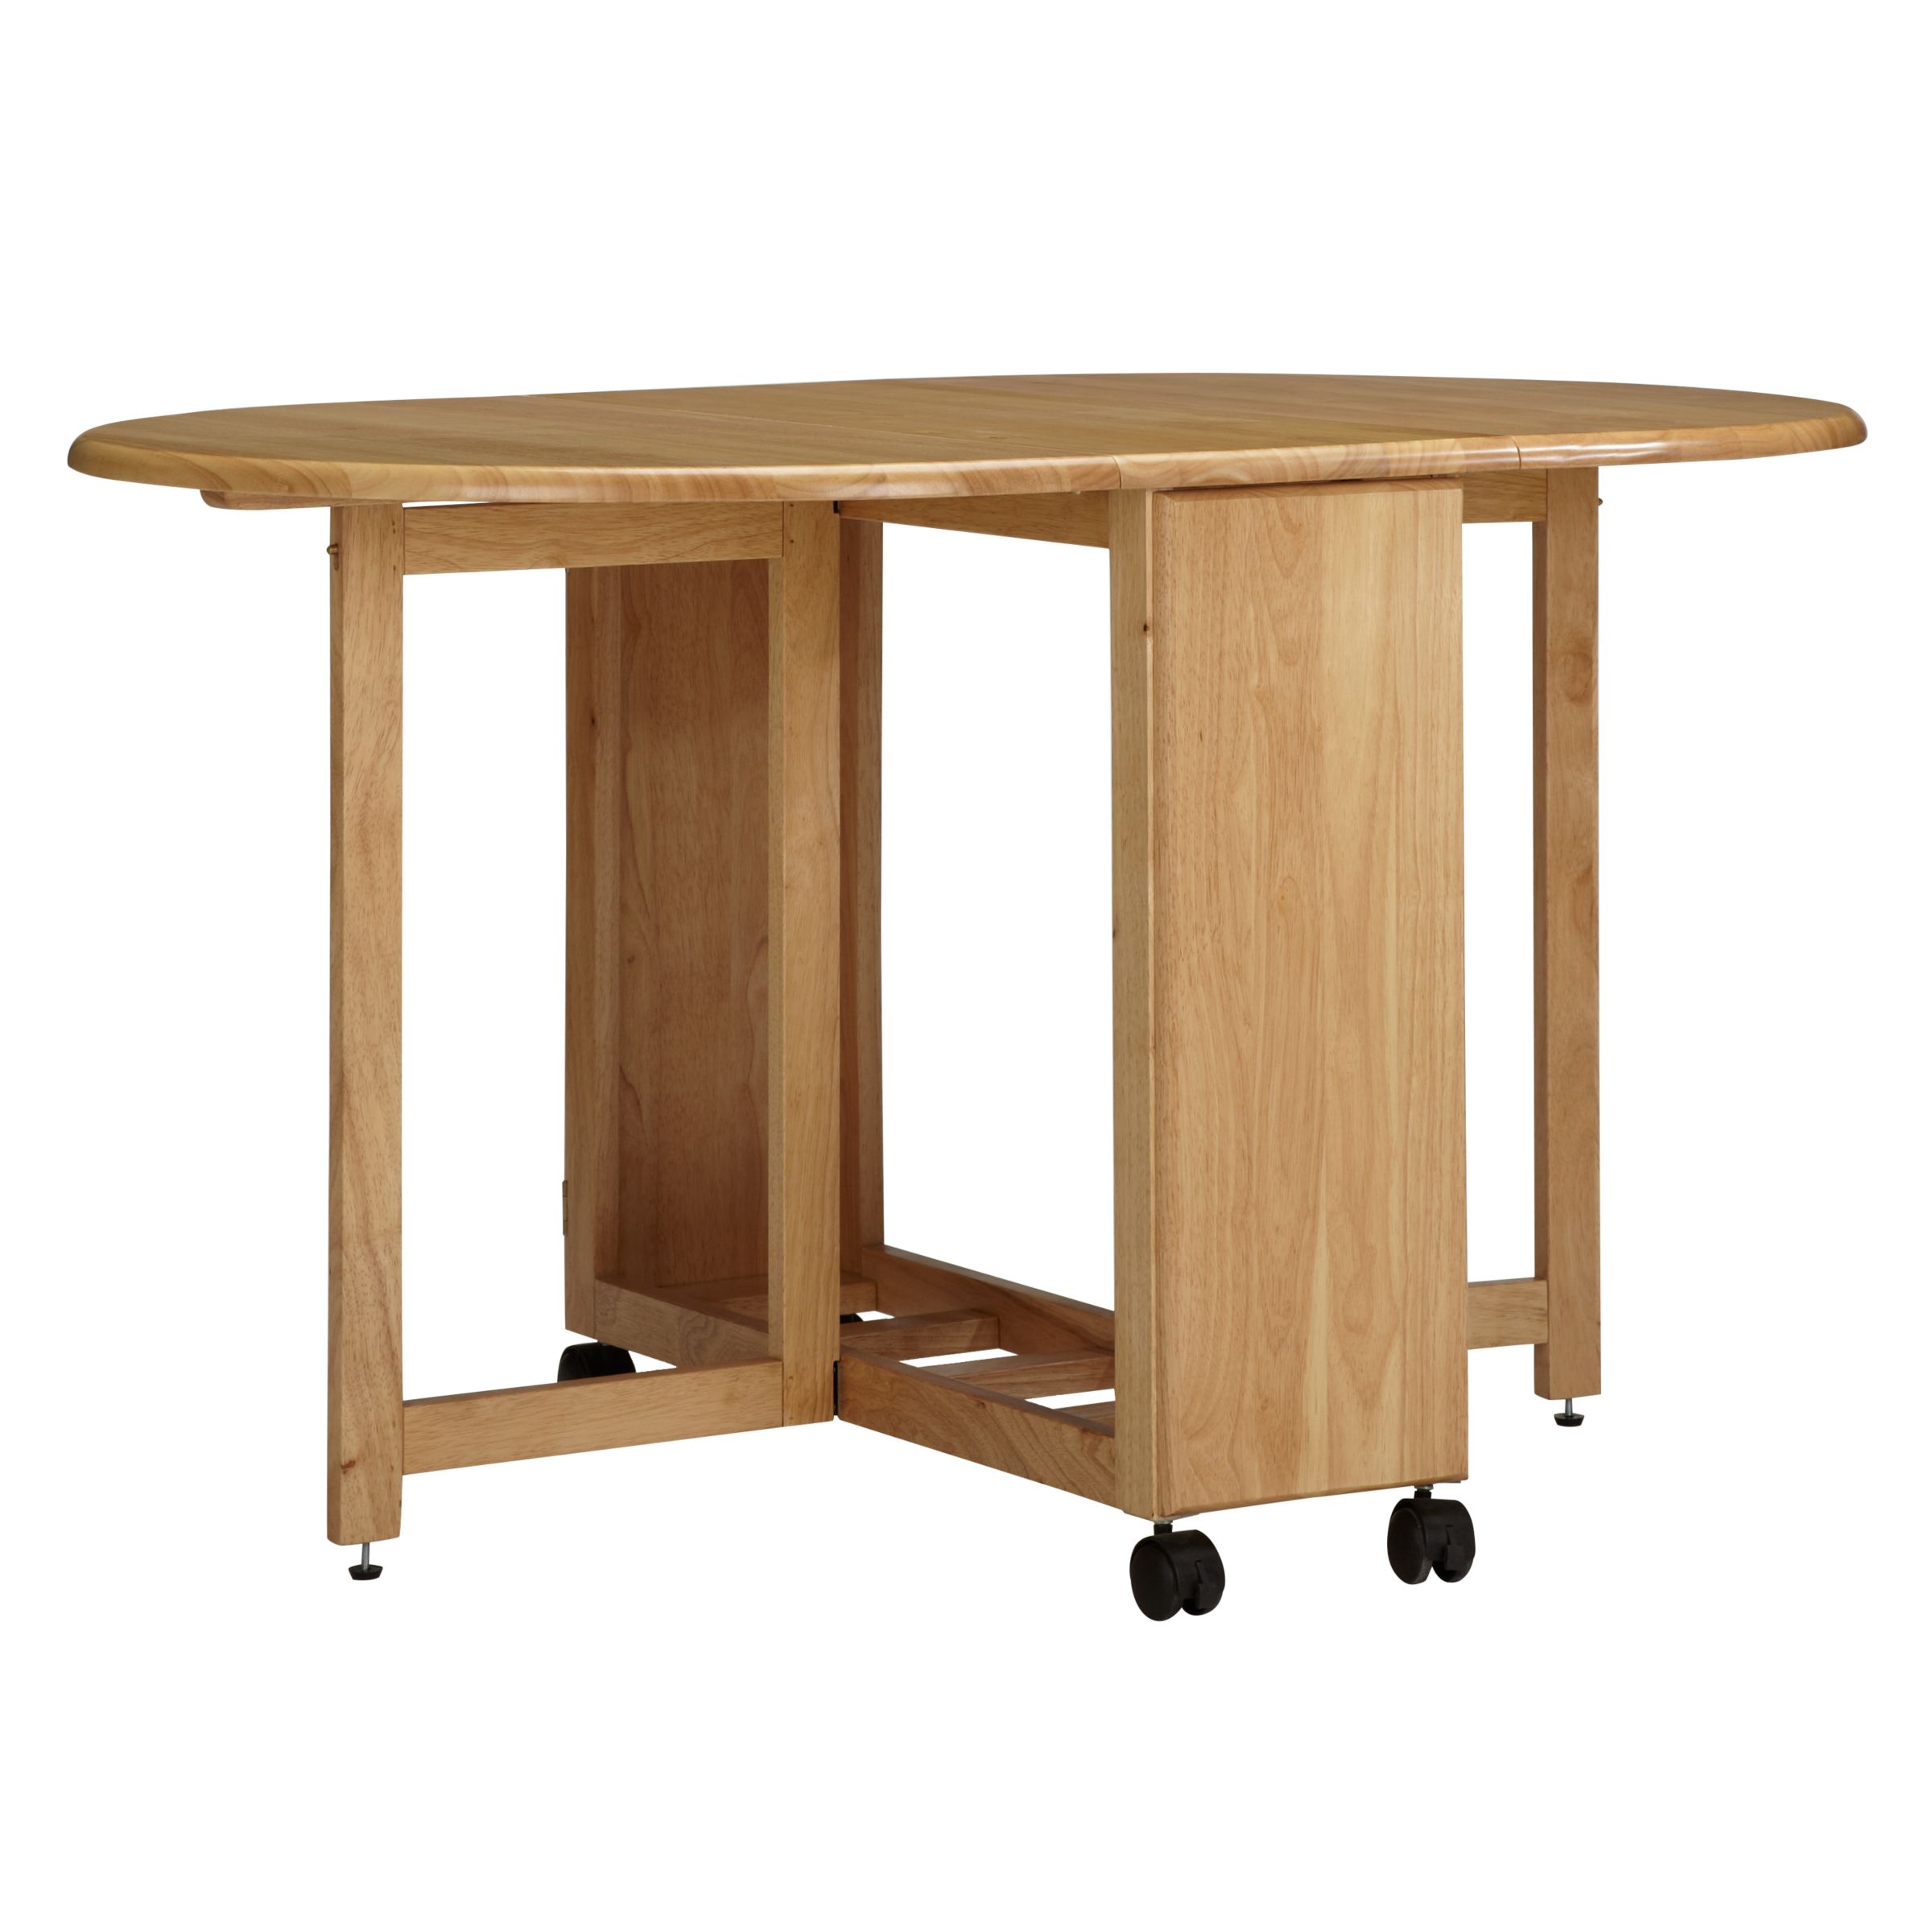 Buy John Lewis Butterfly Drop Leaf Folding Dining Table and Four Chairs ...